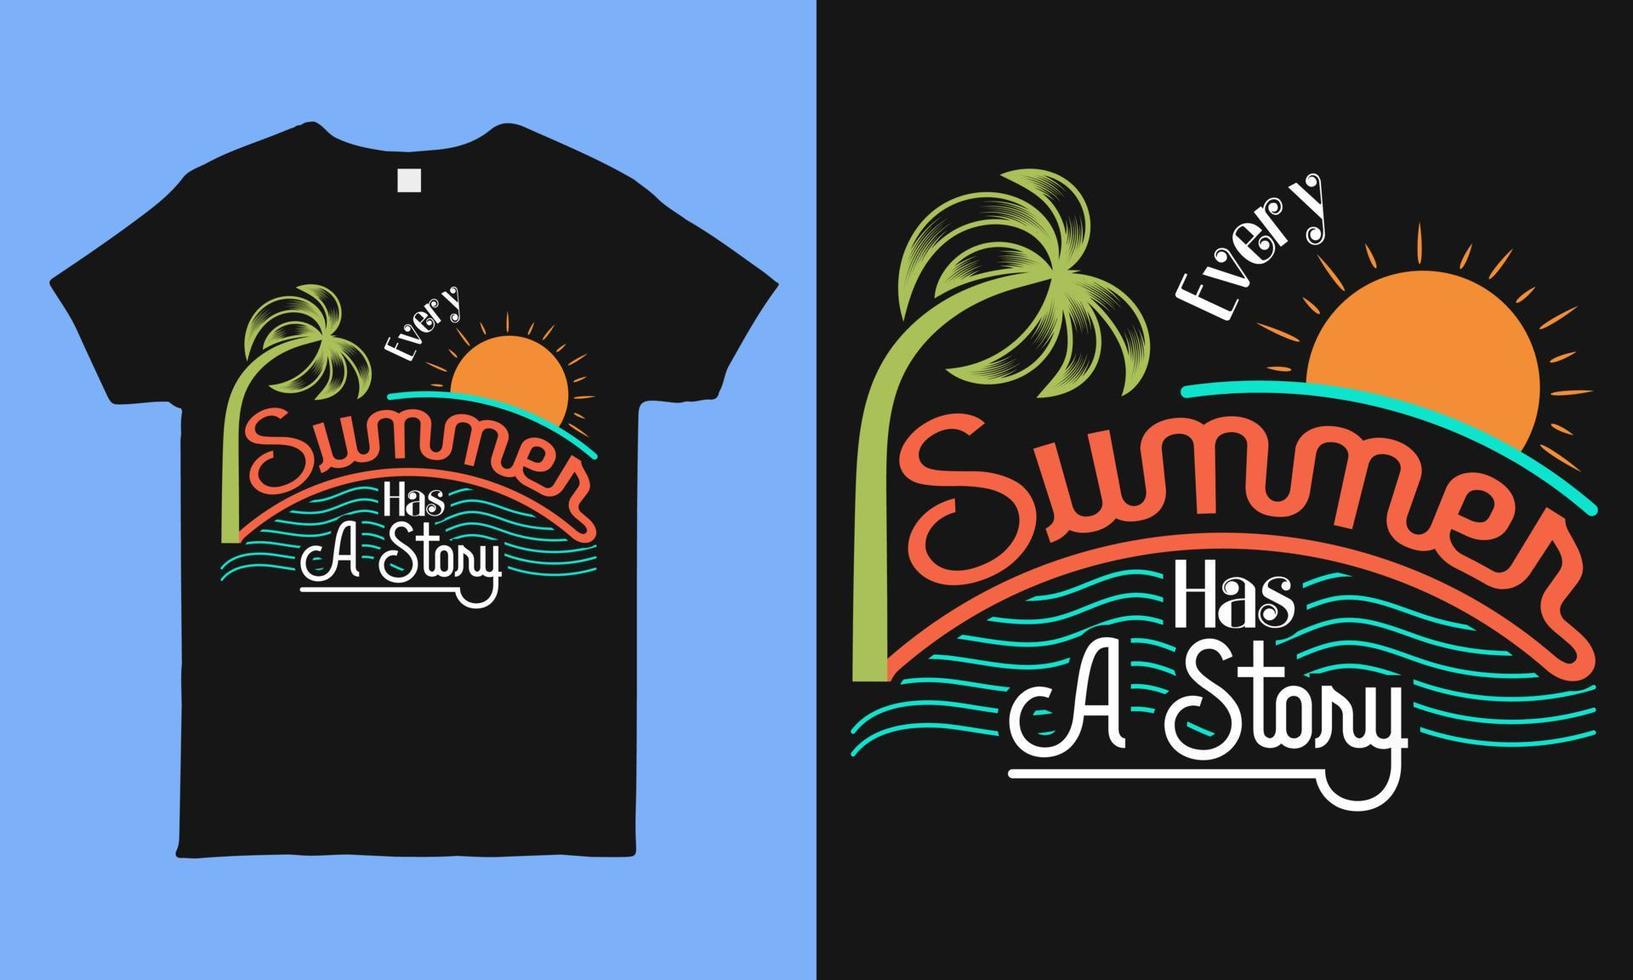 Every  summer has a story. vintage typography lettering design. This illustration can be used as a print on t shirts and bags, stationary, sticker or as a poster. vector